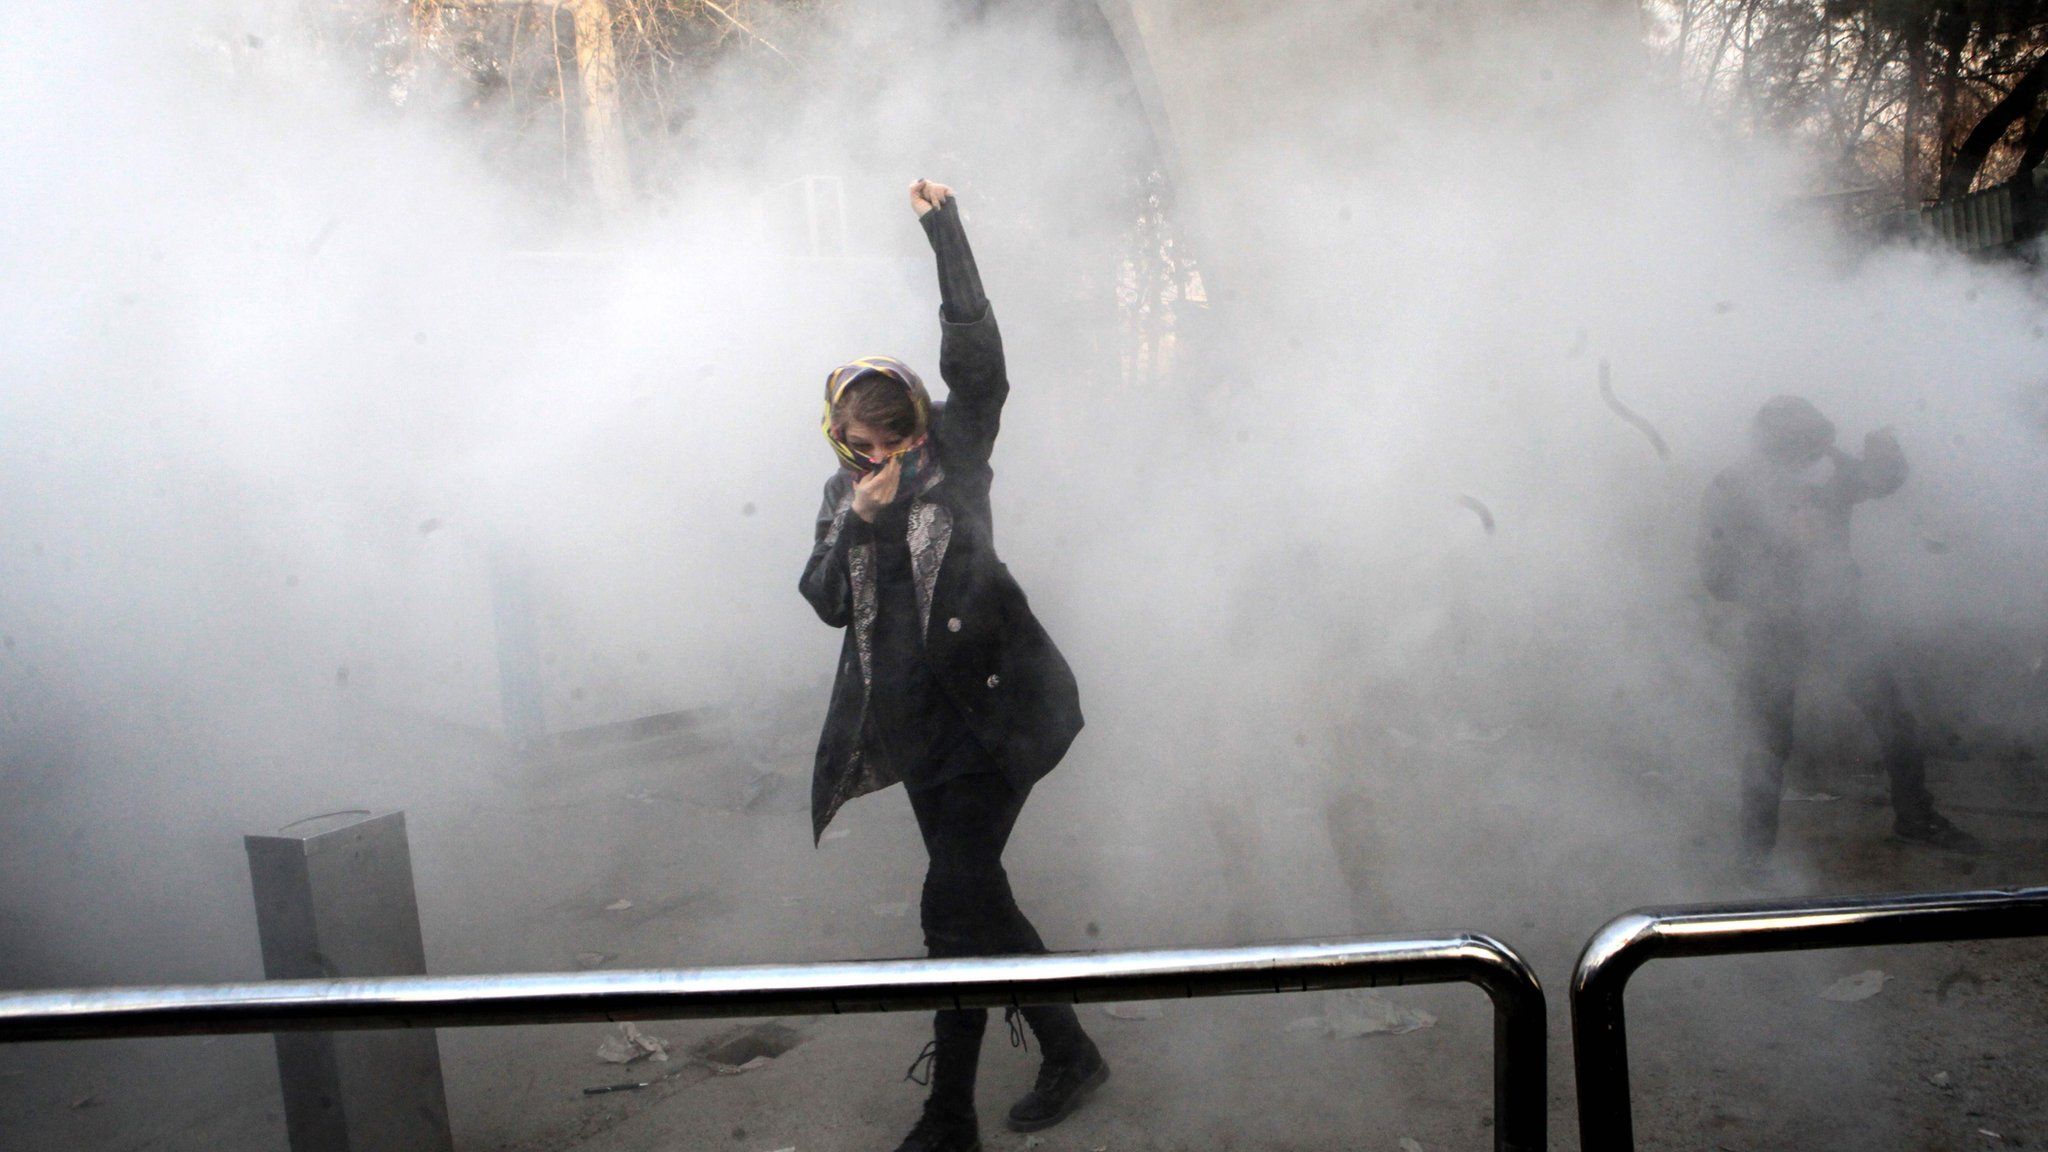 An Iranian woman raises her fist during a protest in Tehran on 30 December 2017